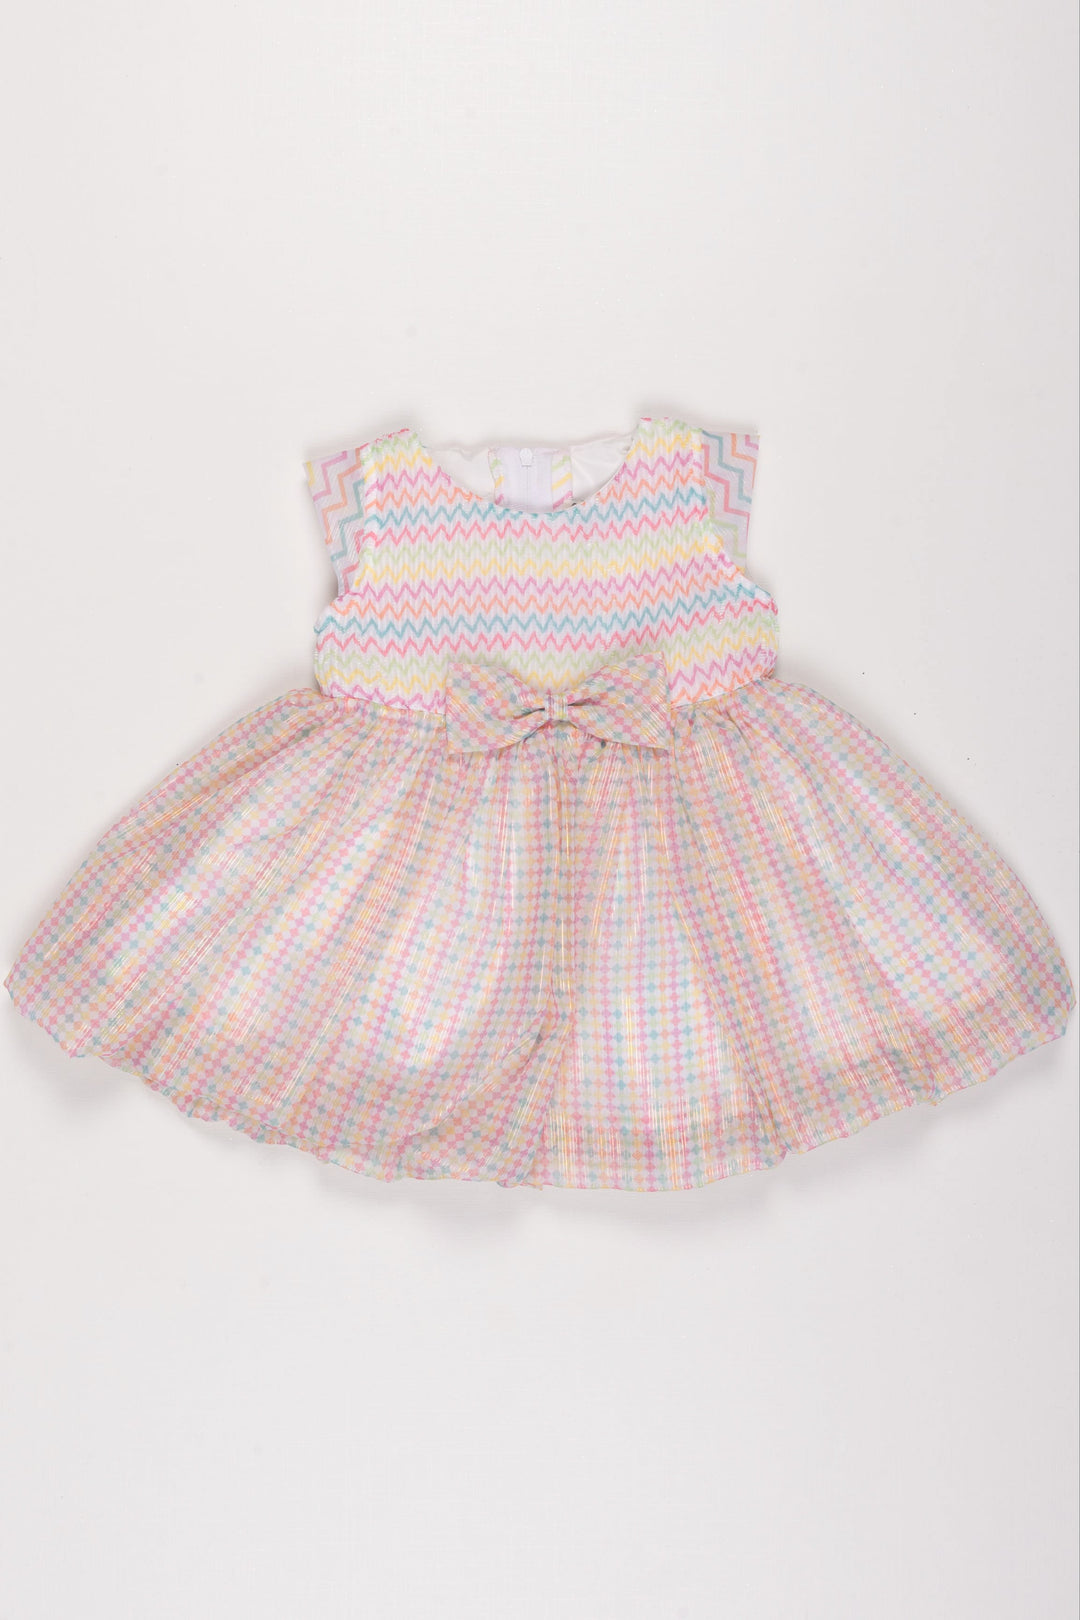 The Nesavu Baby Fancy Frock Infant Girl's Pastel Zigzag and Gingham Frock with Bow Detail - Adorable Dress for Springtime Festivities Nesavu 12 (3M) / multicolor BFJ505A-12 Pastel Zigzag and Gingham Frock for Infants | Adorable Springtime Dress | The Nesavu